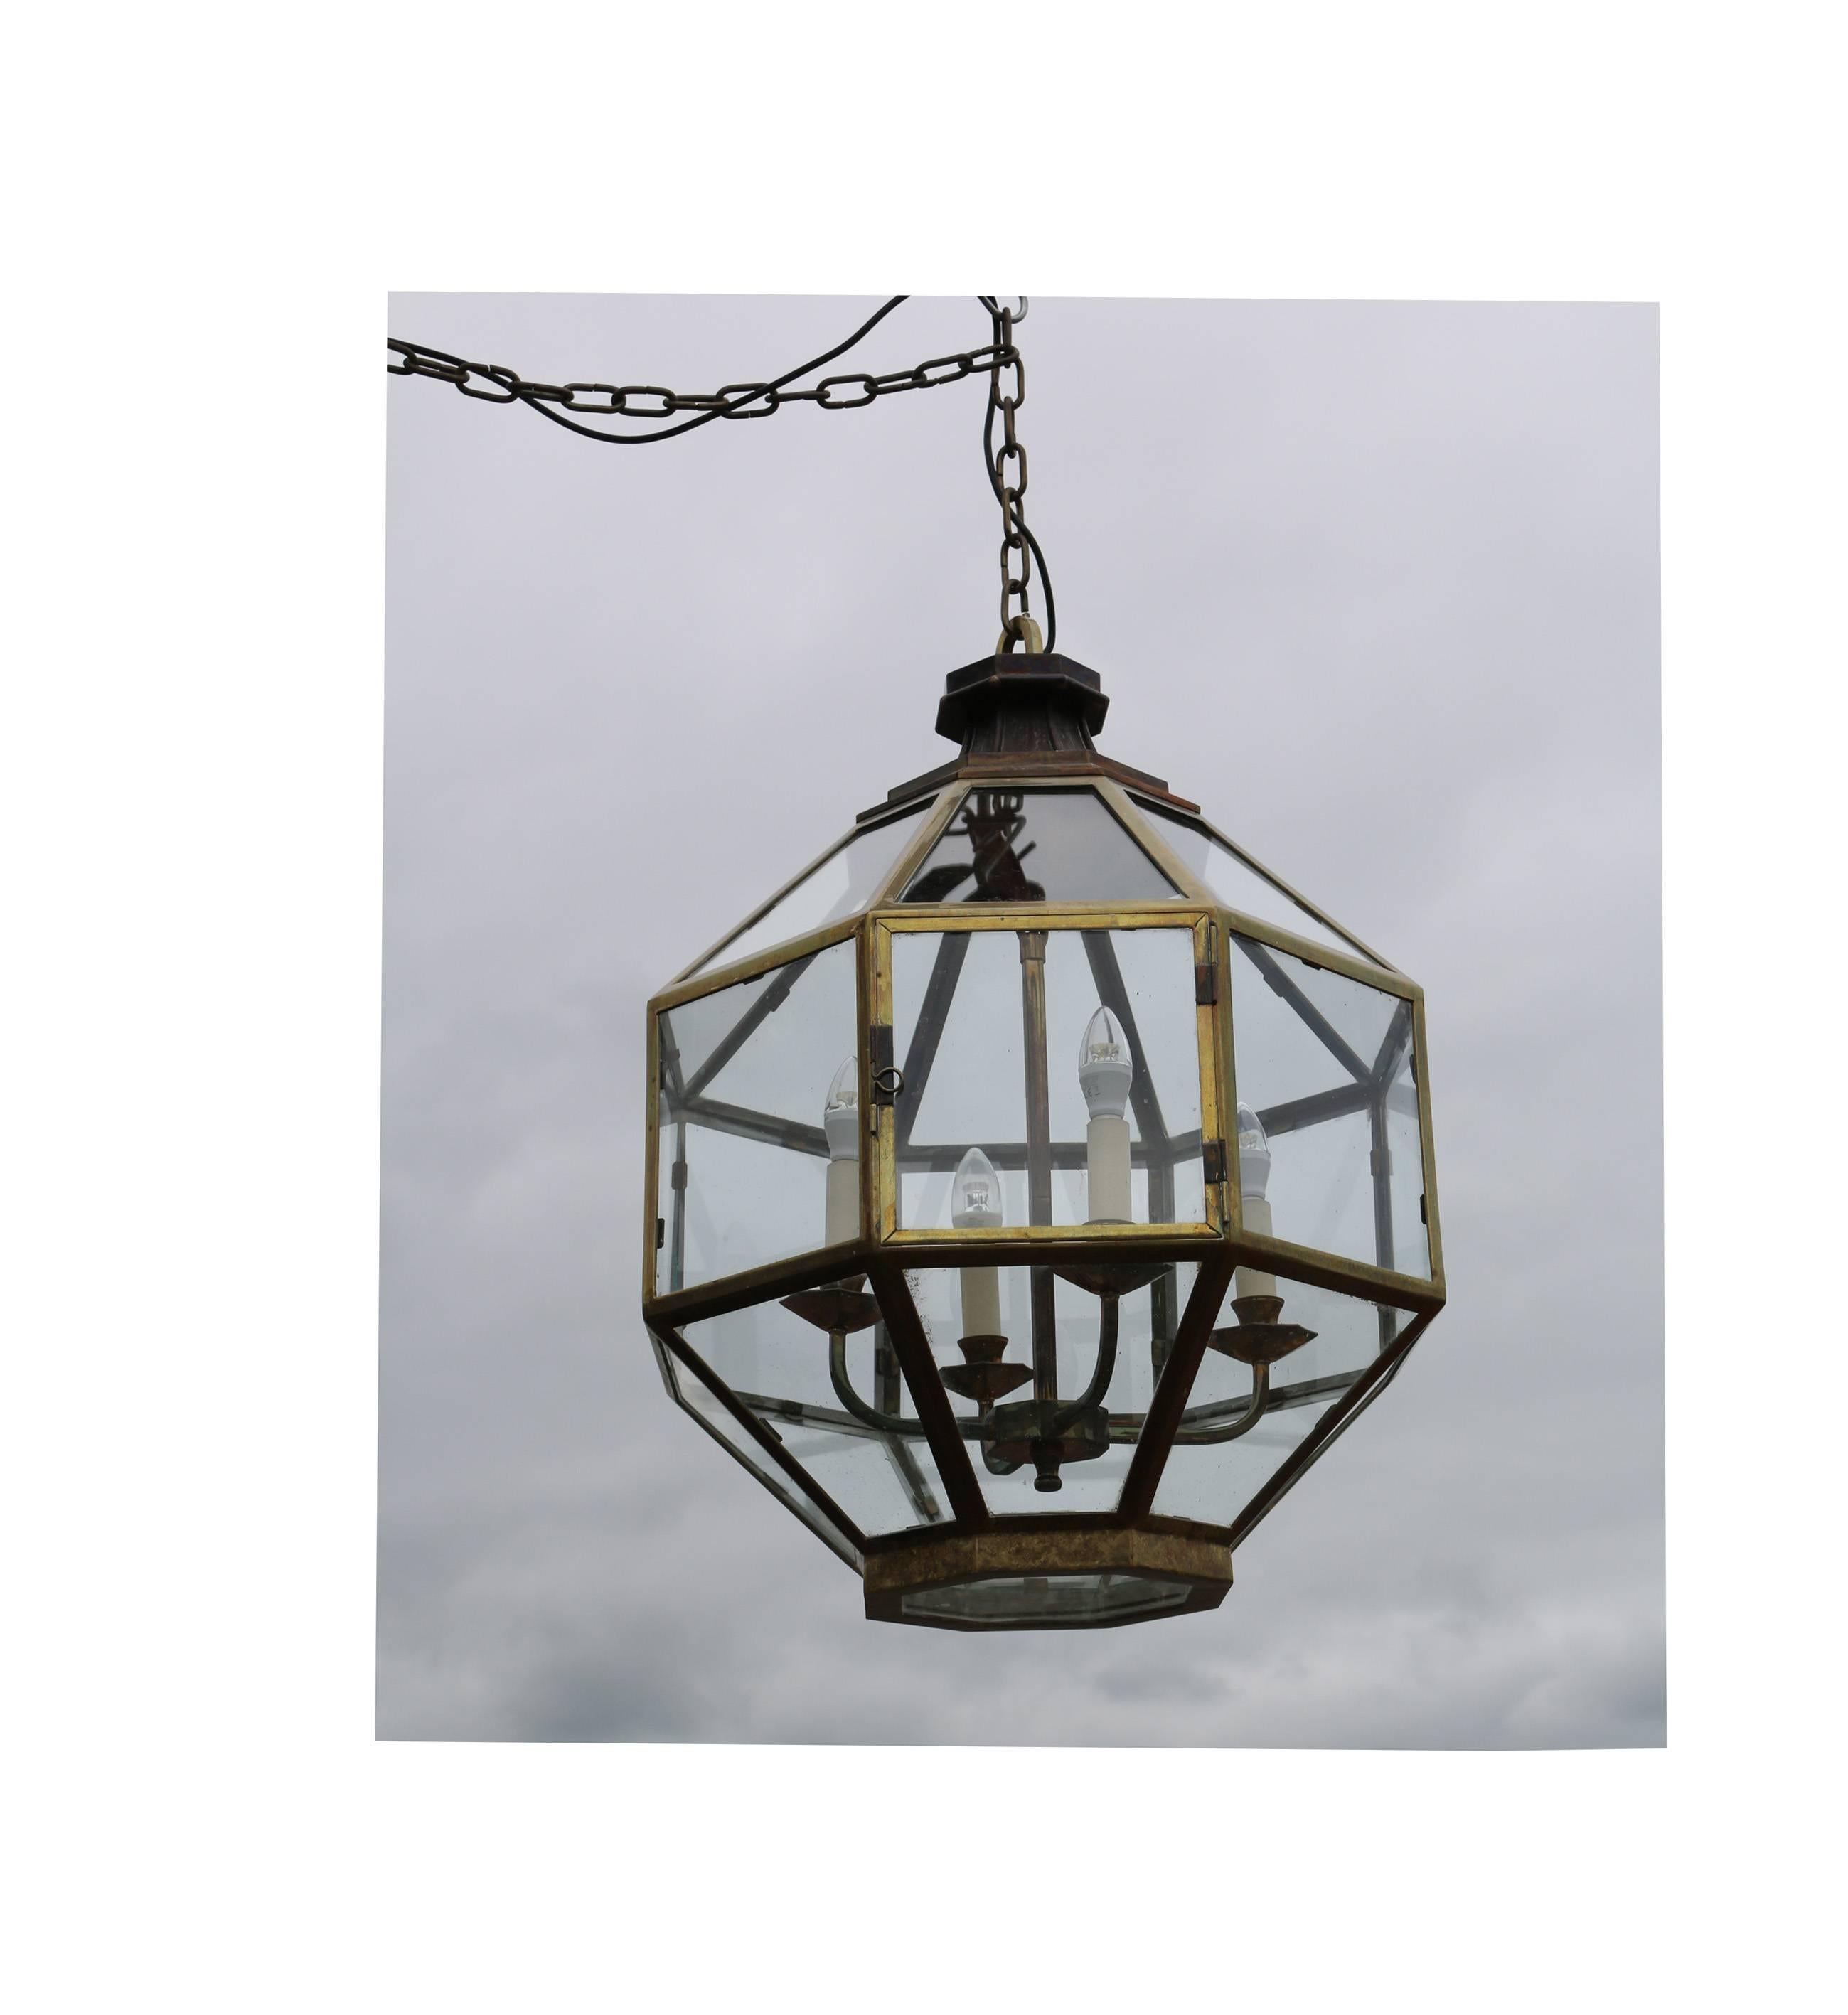 These lanterns were reclaimed from Wentworth Golf Club, Virginia Water, and are in excellent condition, 20th century.
Price for the pair.
Weight 18 kg.